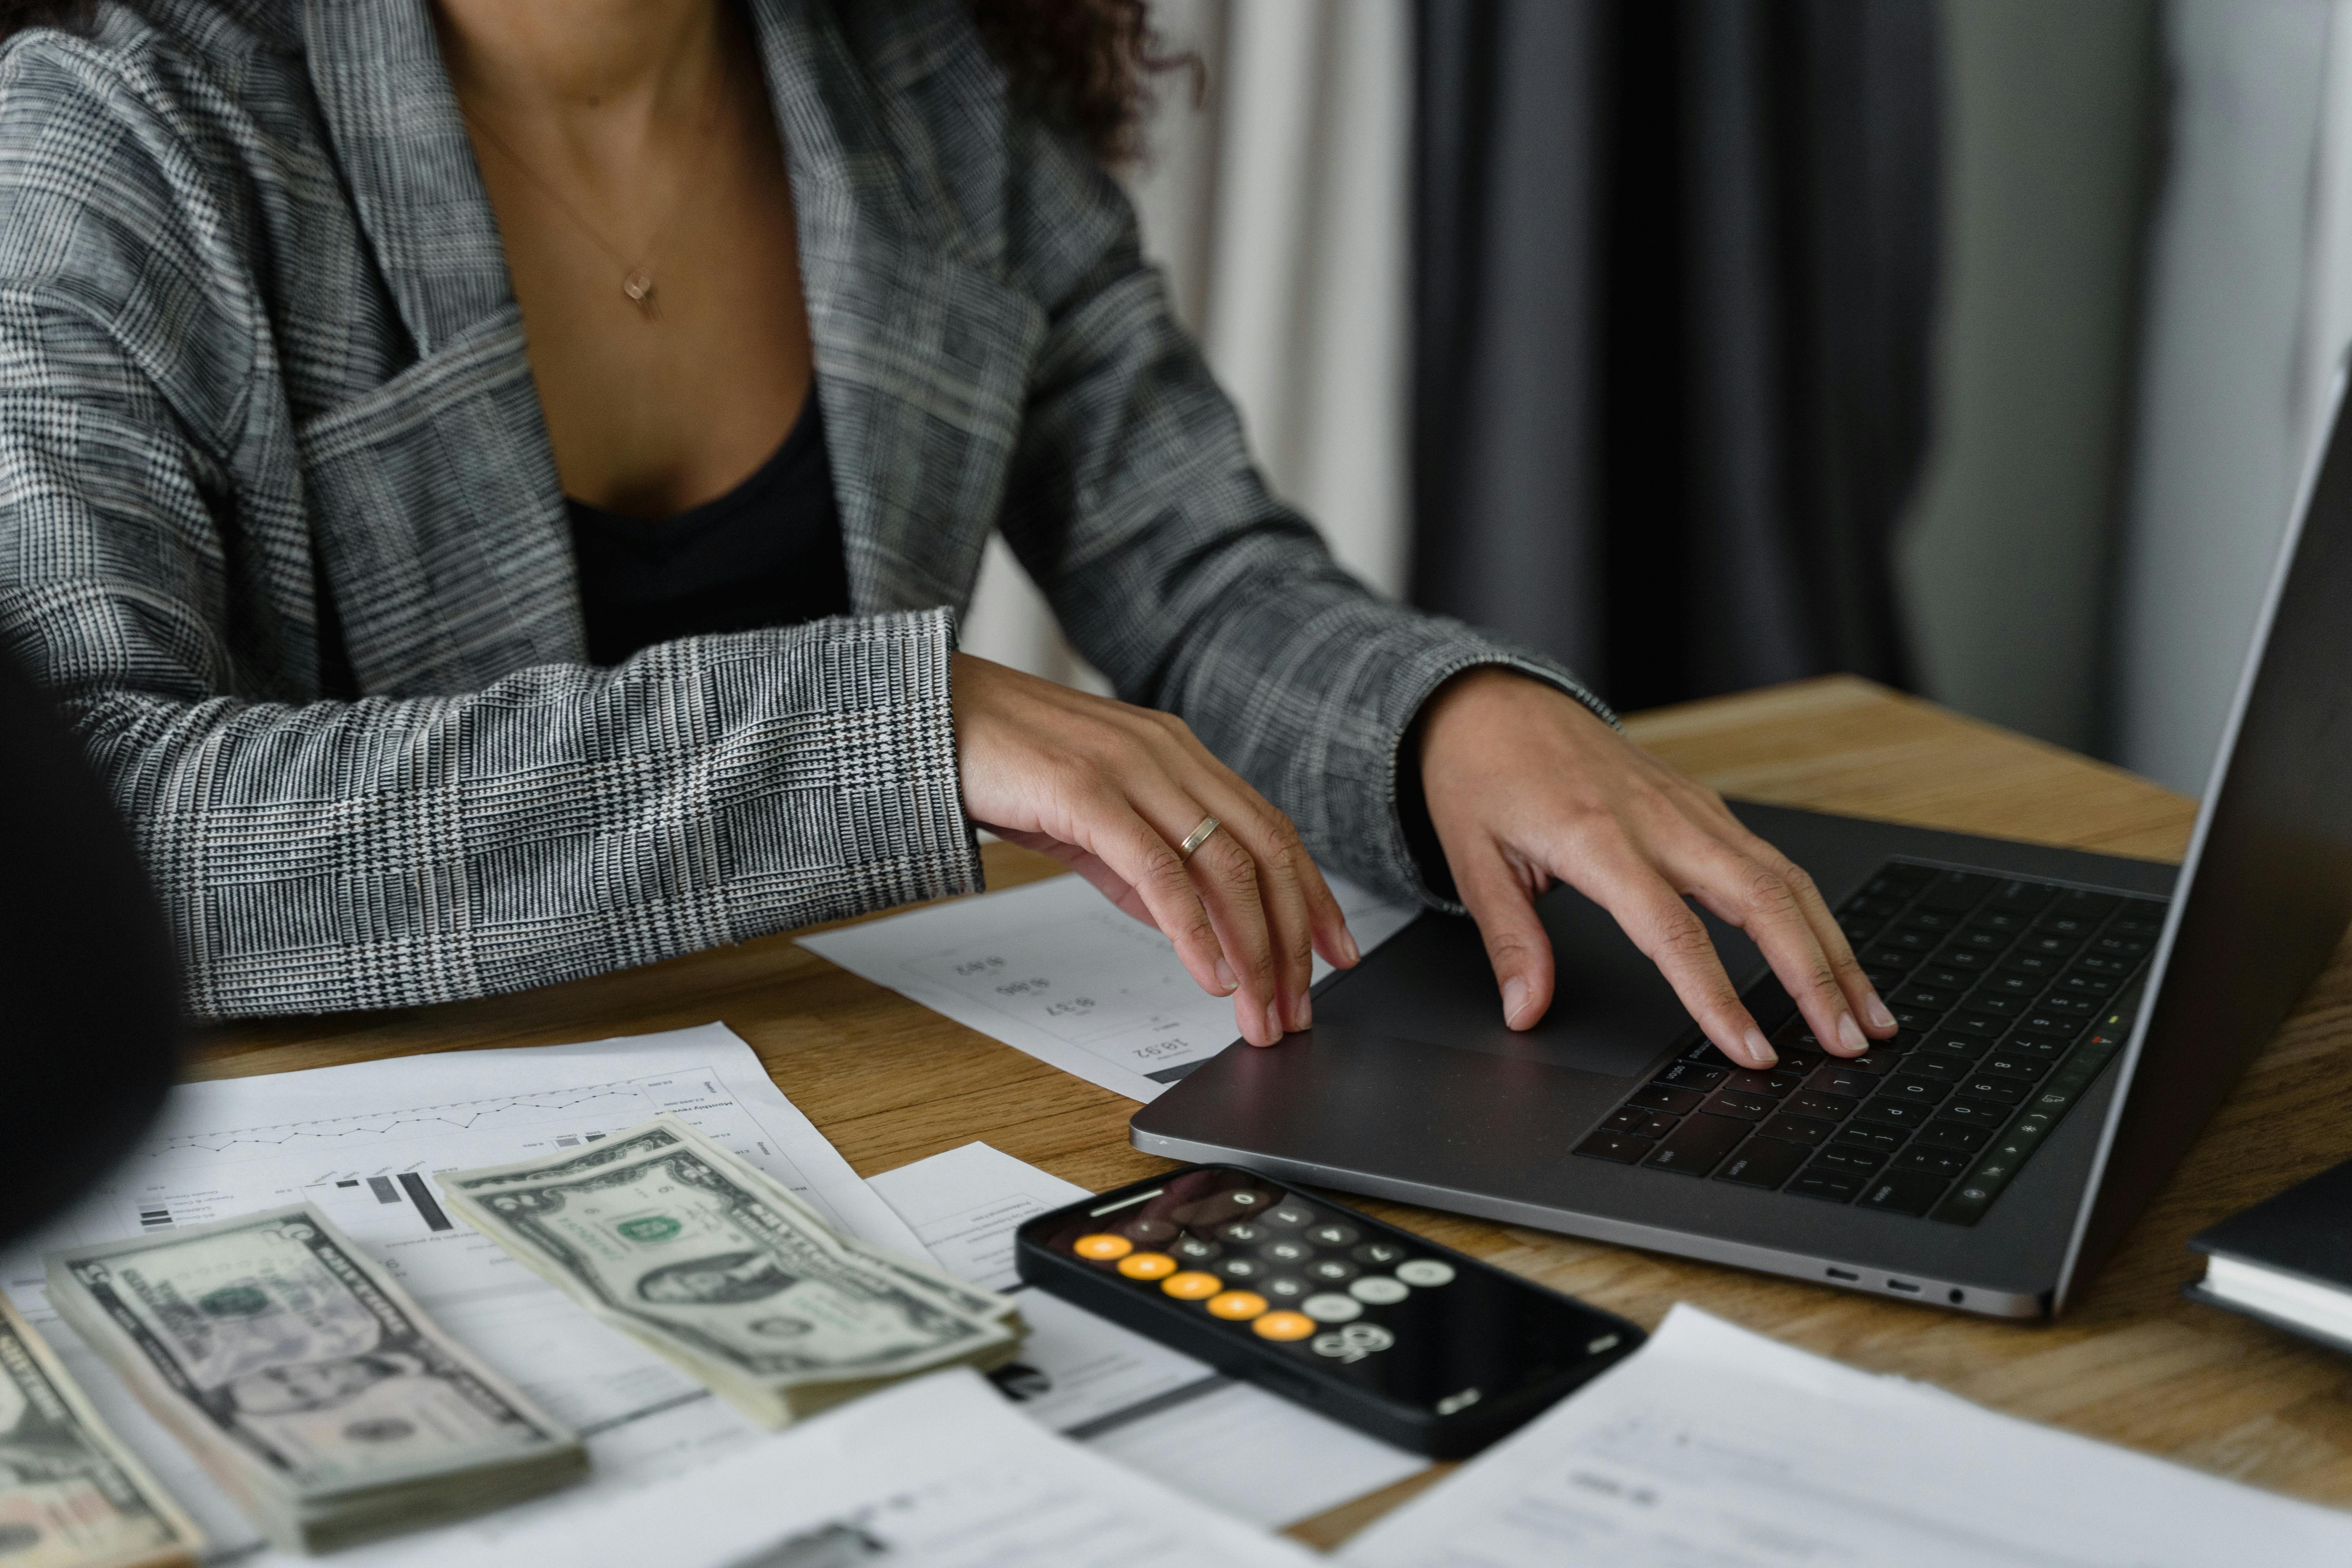 A woman calculating money and saving up | Source: Pexels